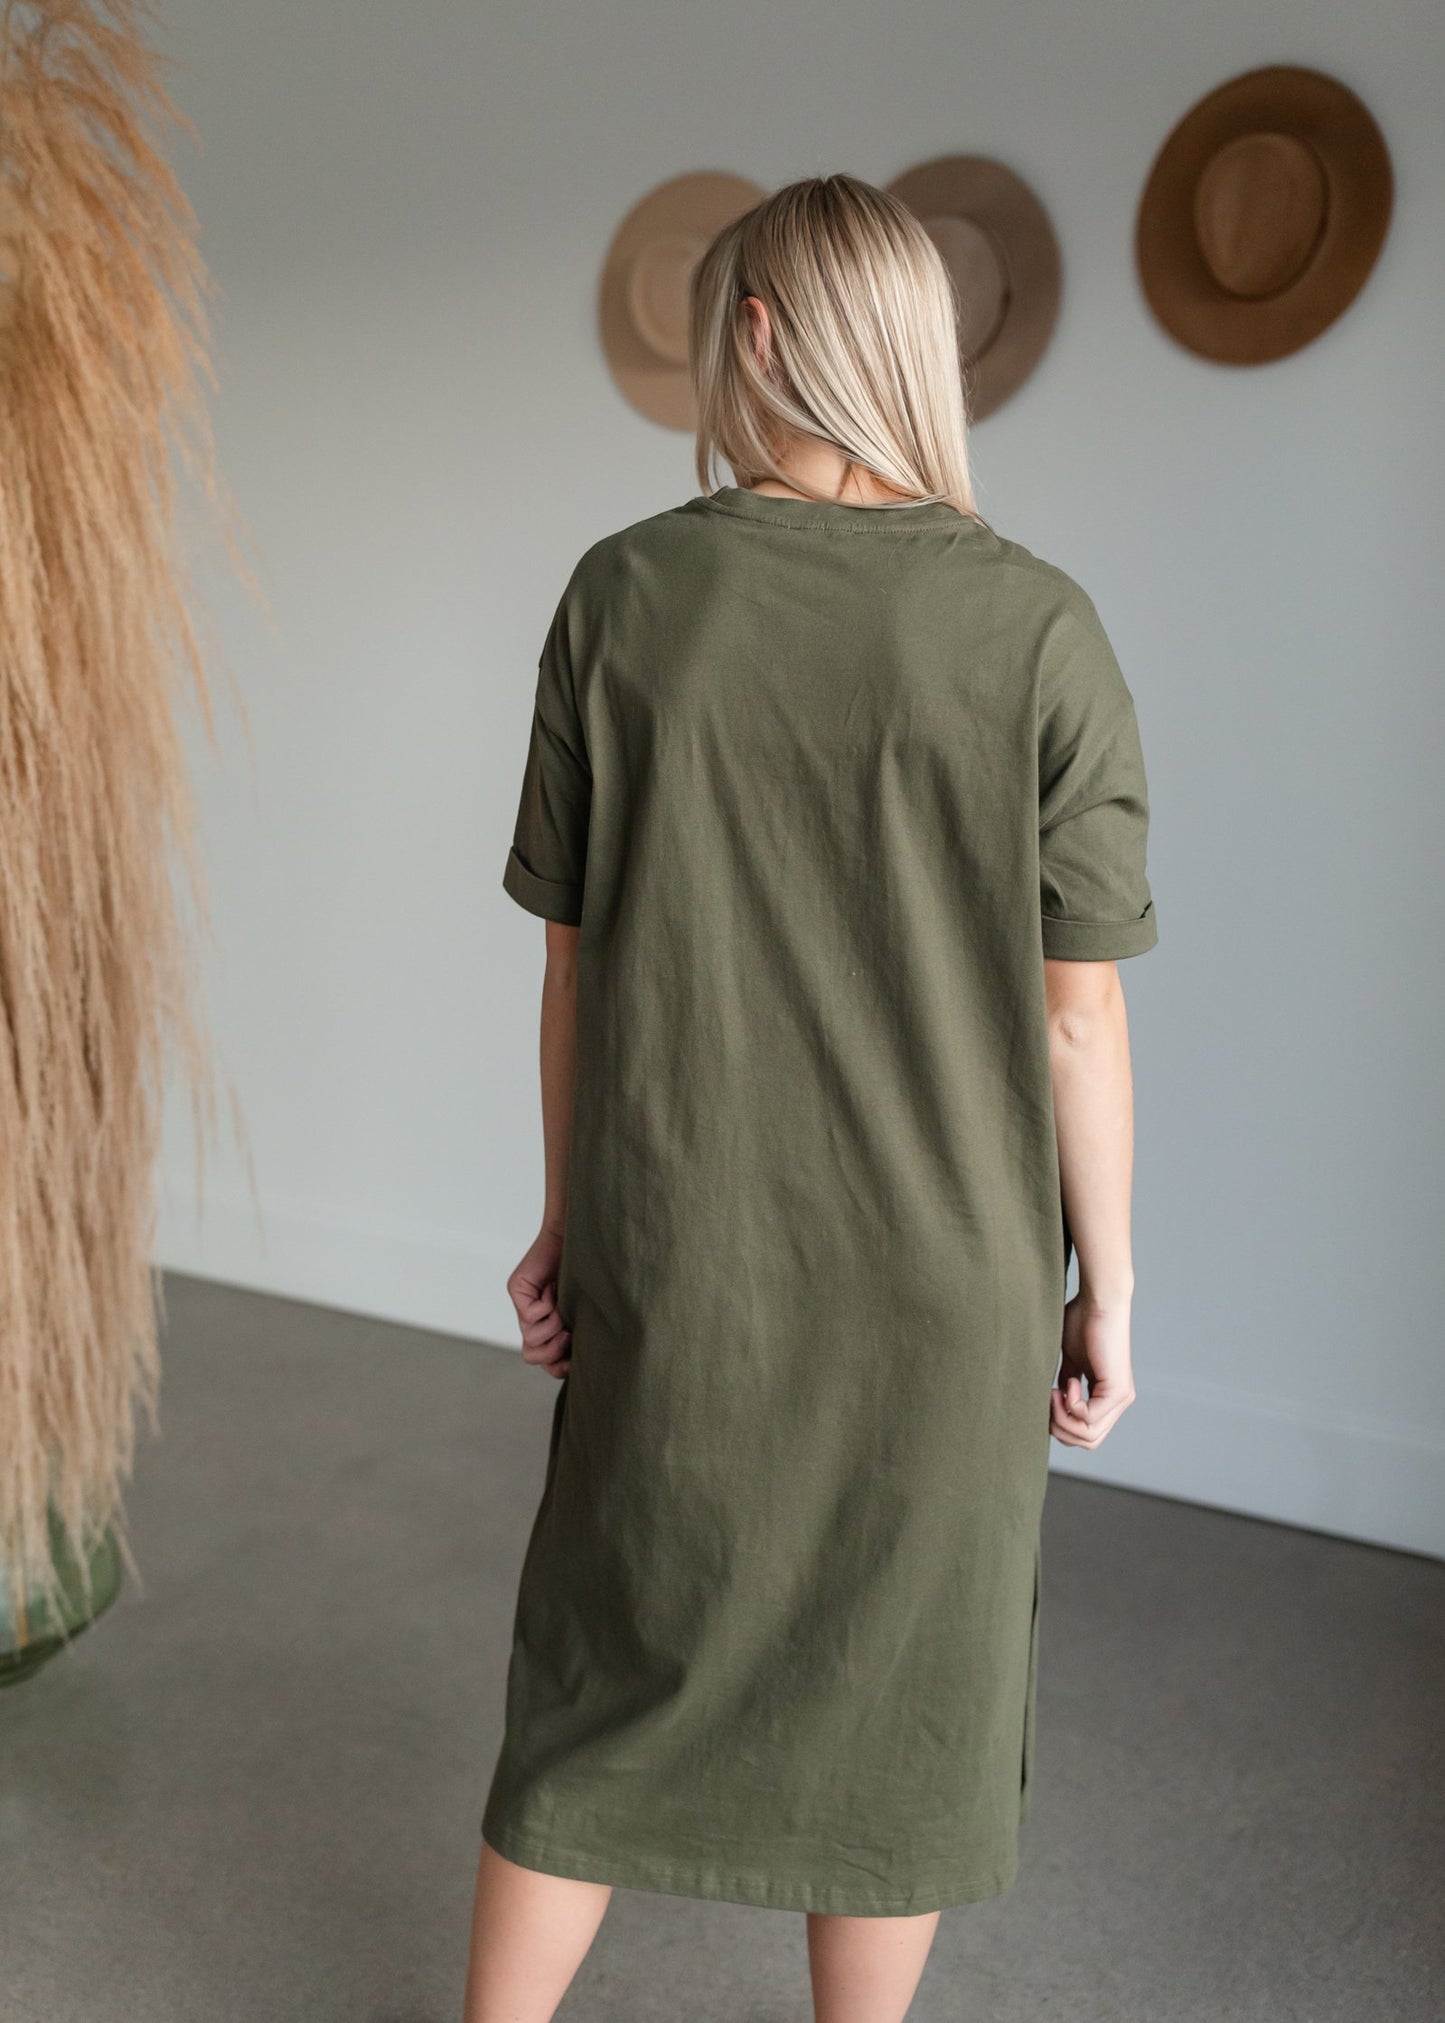 Olive Cotton Relaxed Fit Shift Dress Dresses Mod Ref